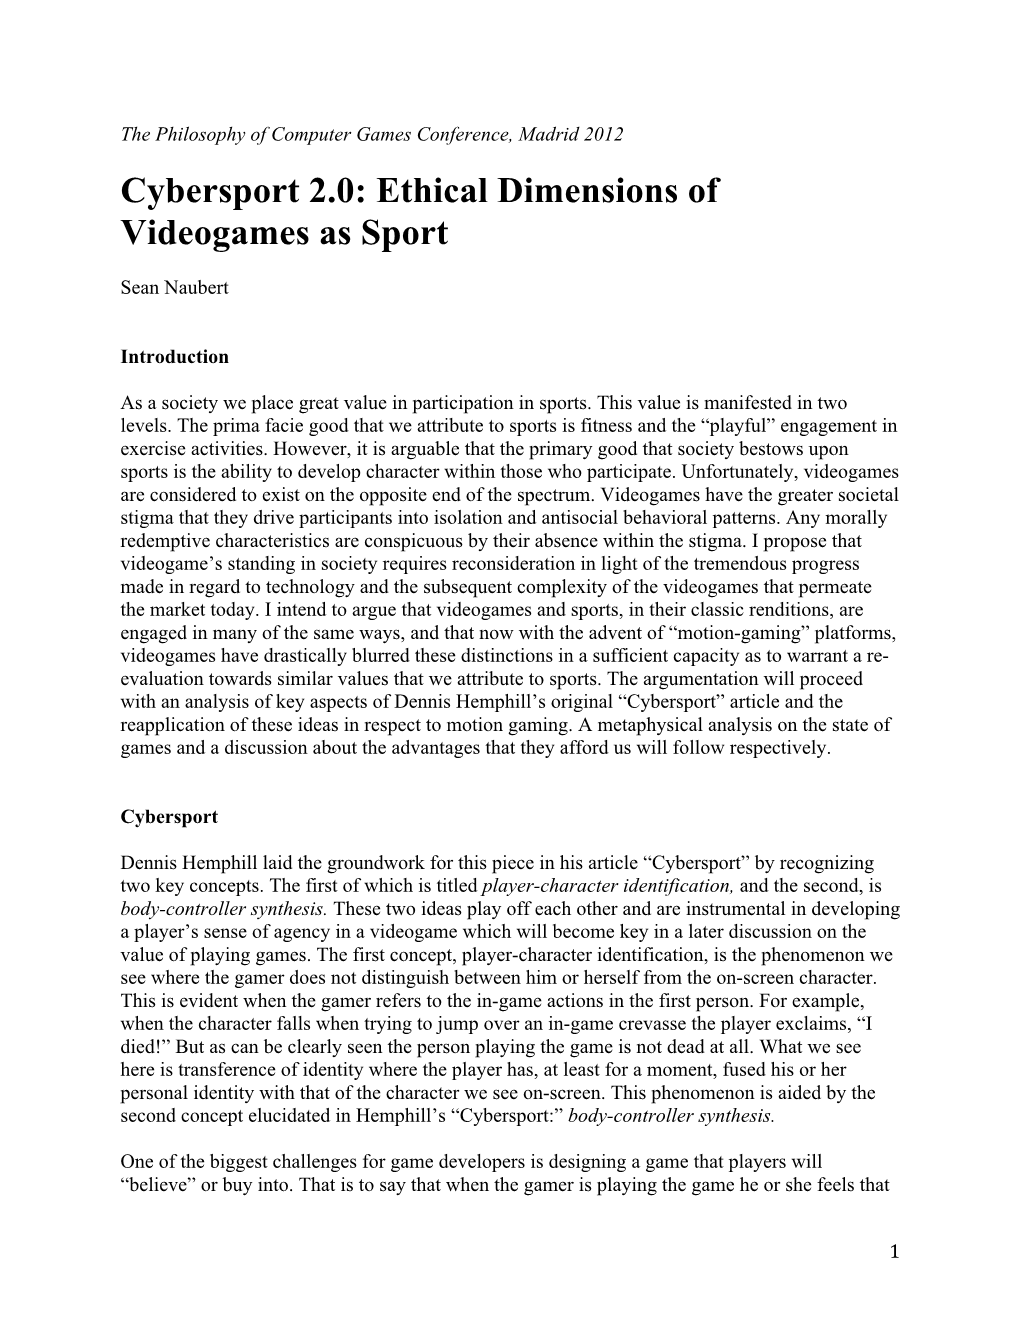 Cybersport 2.0: Ethical Dimensions of Videogames As Sport